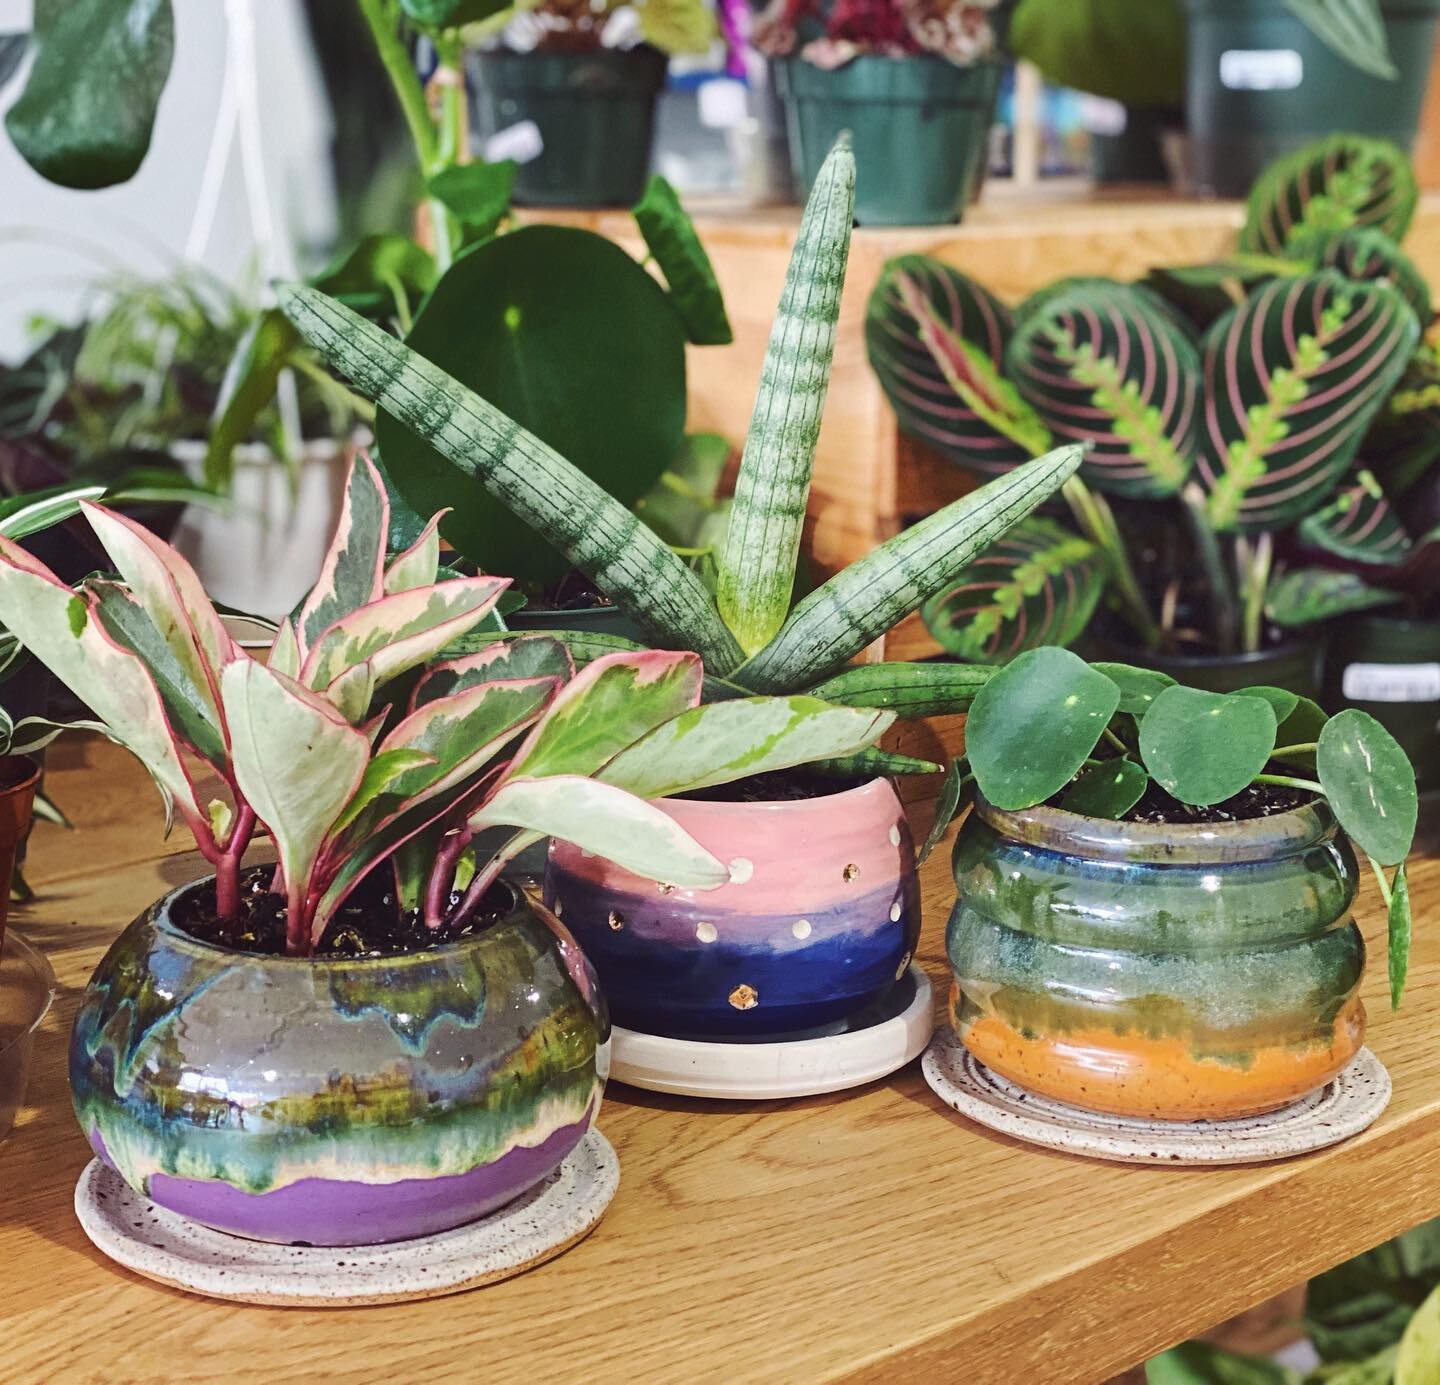 In addition to plants, Honey Plant sells locally made pottery.